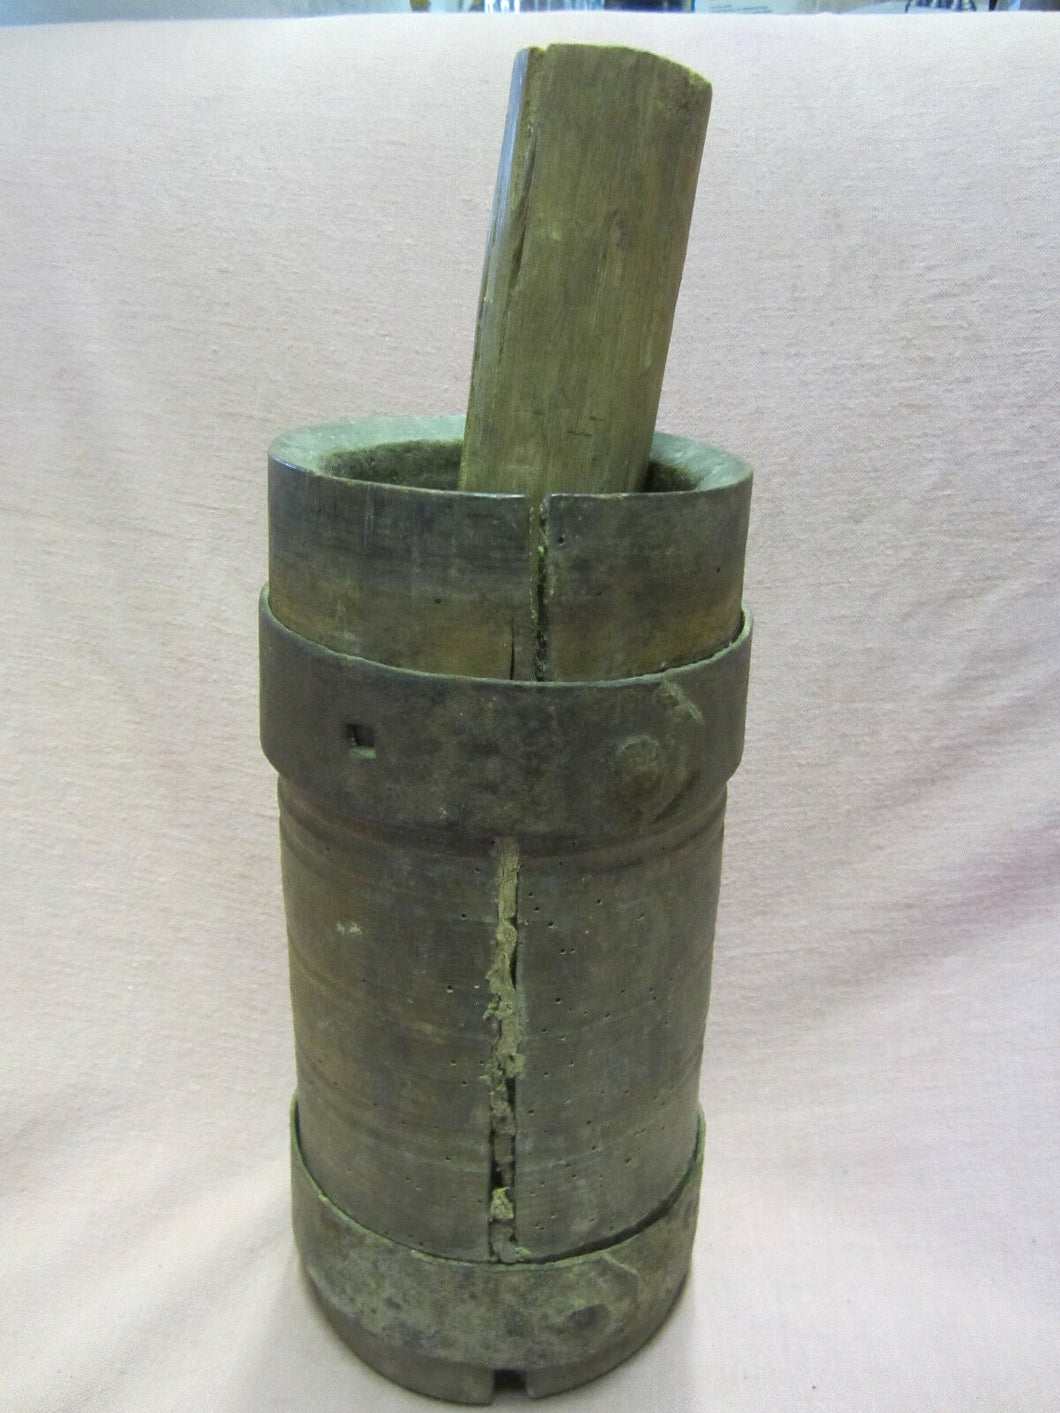 EARLY Antique Wooden MORTAR and PESTLE WROUGHT Iron Bands on Mortar-Great Patina